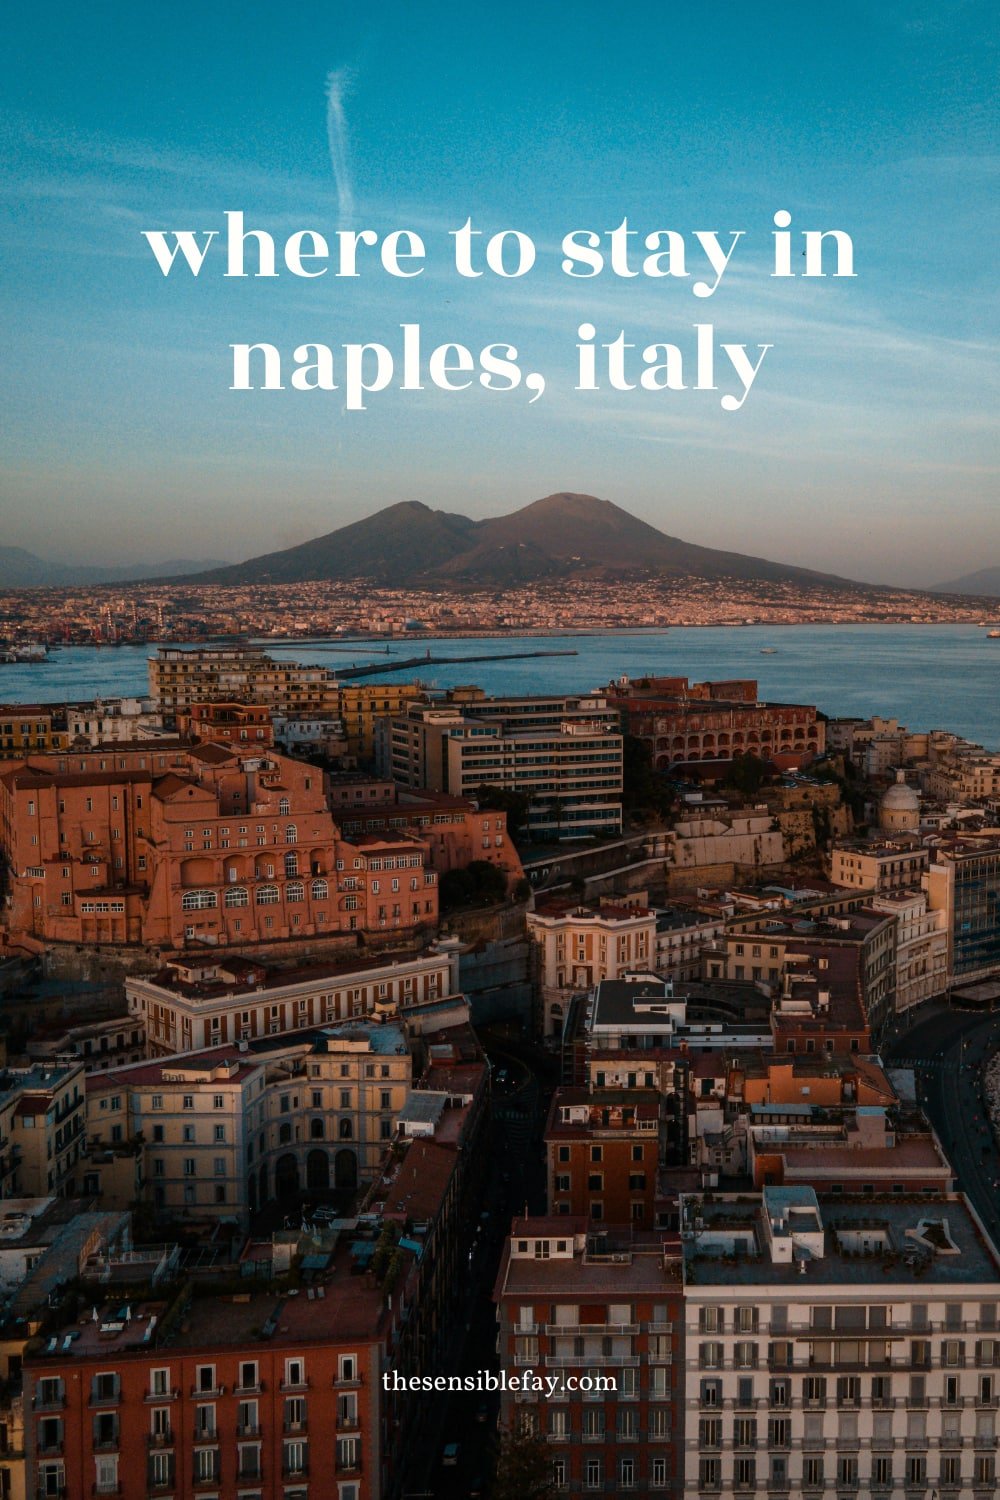 Where to stay in naples 2.jpg